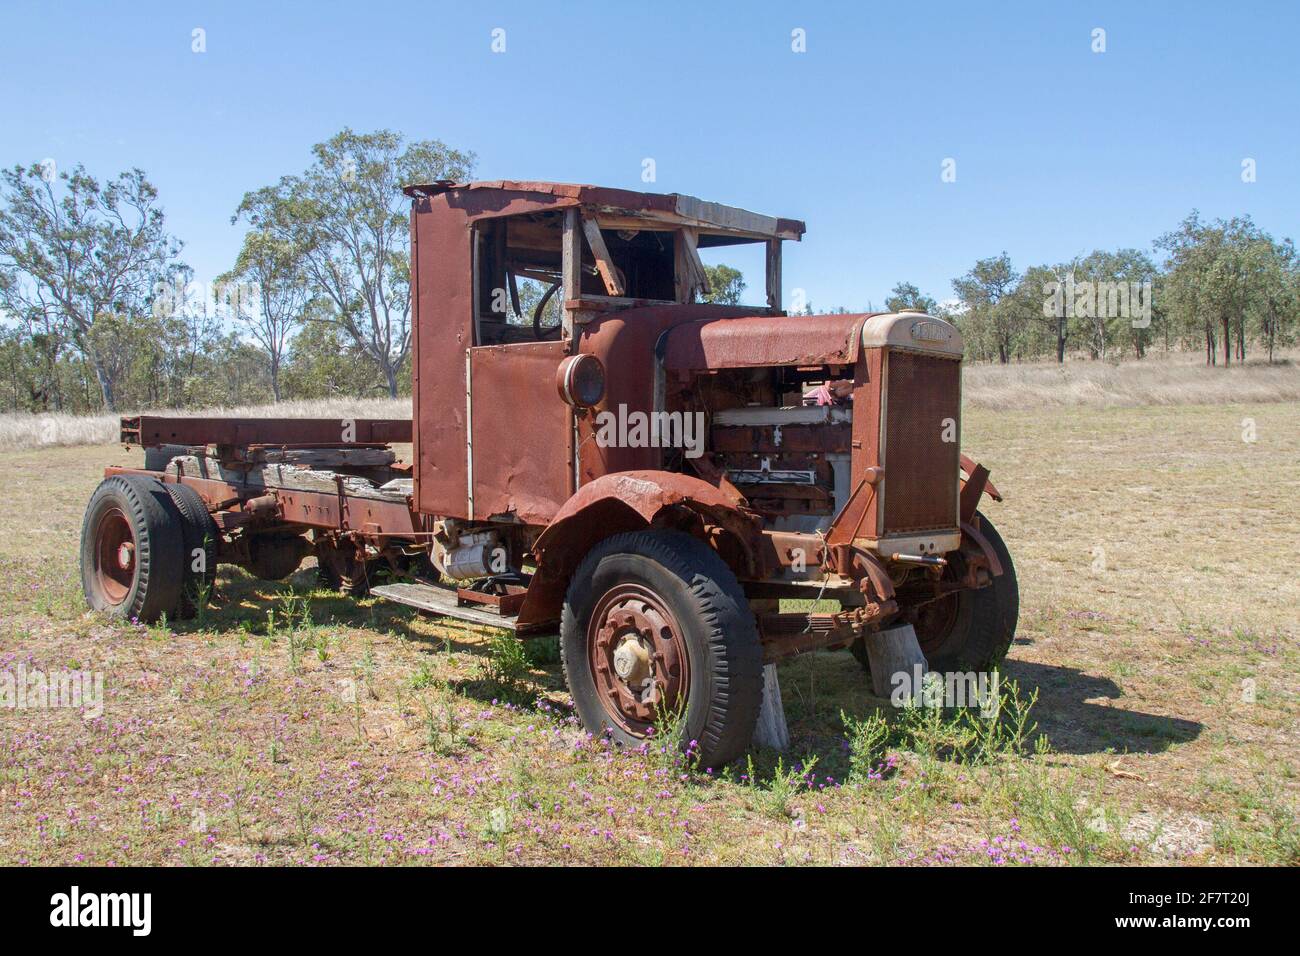 Old and rusting Leyland truck / lorry abandoned in grassy field under blue sky near ruins of historic steam sawmill in Australia Stock Photo